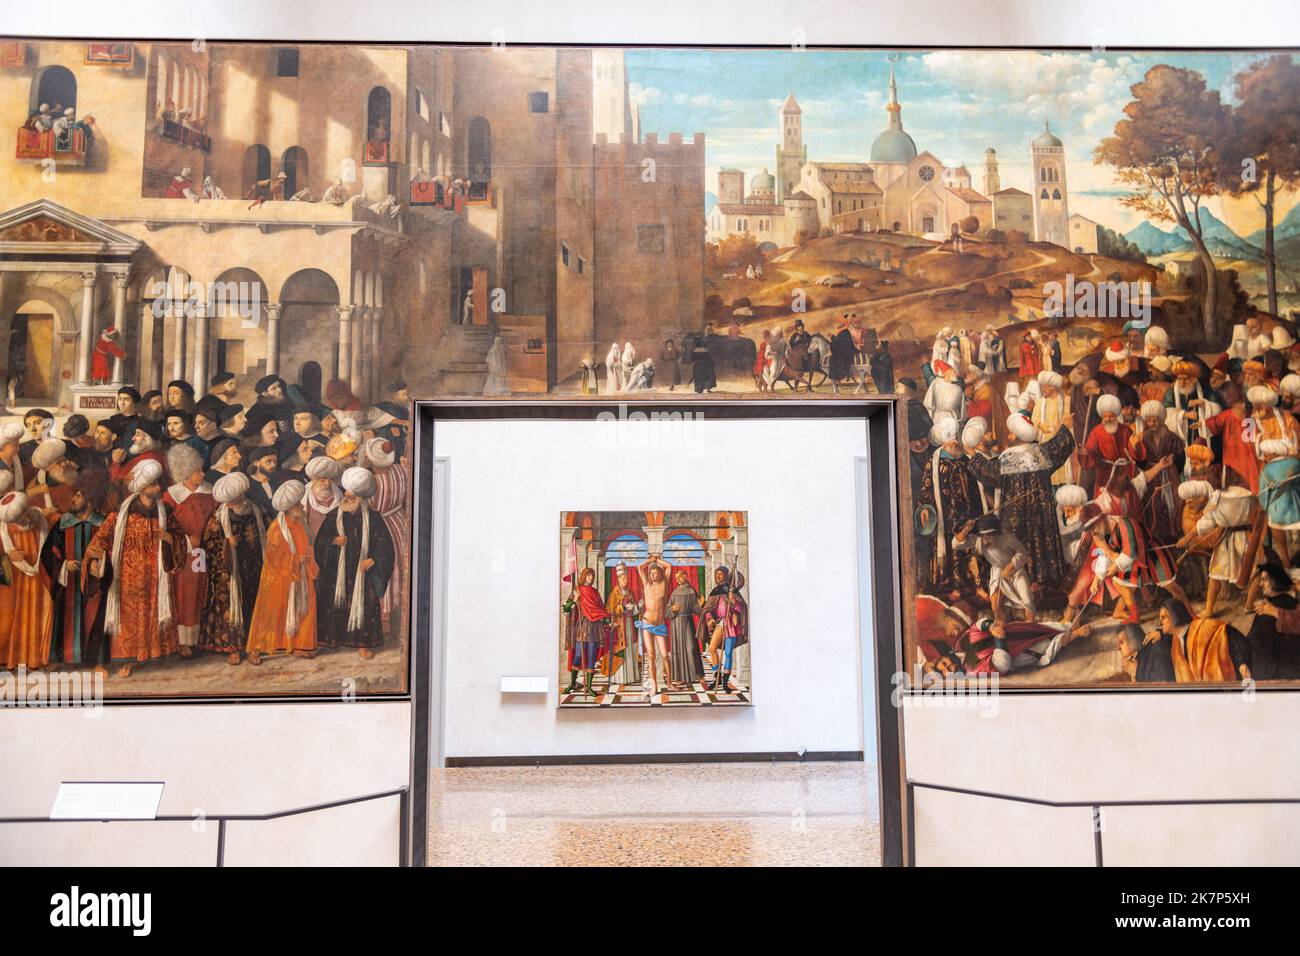 An art display inside Gallerie dell'Accademia art gallery in Venice, Italy Stock Photo